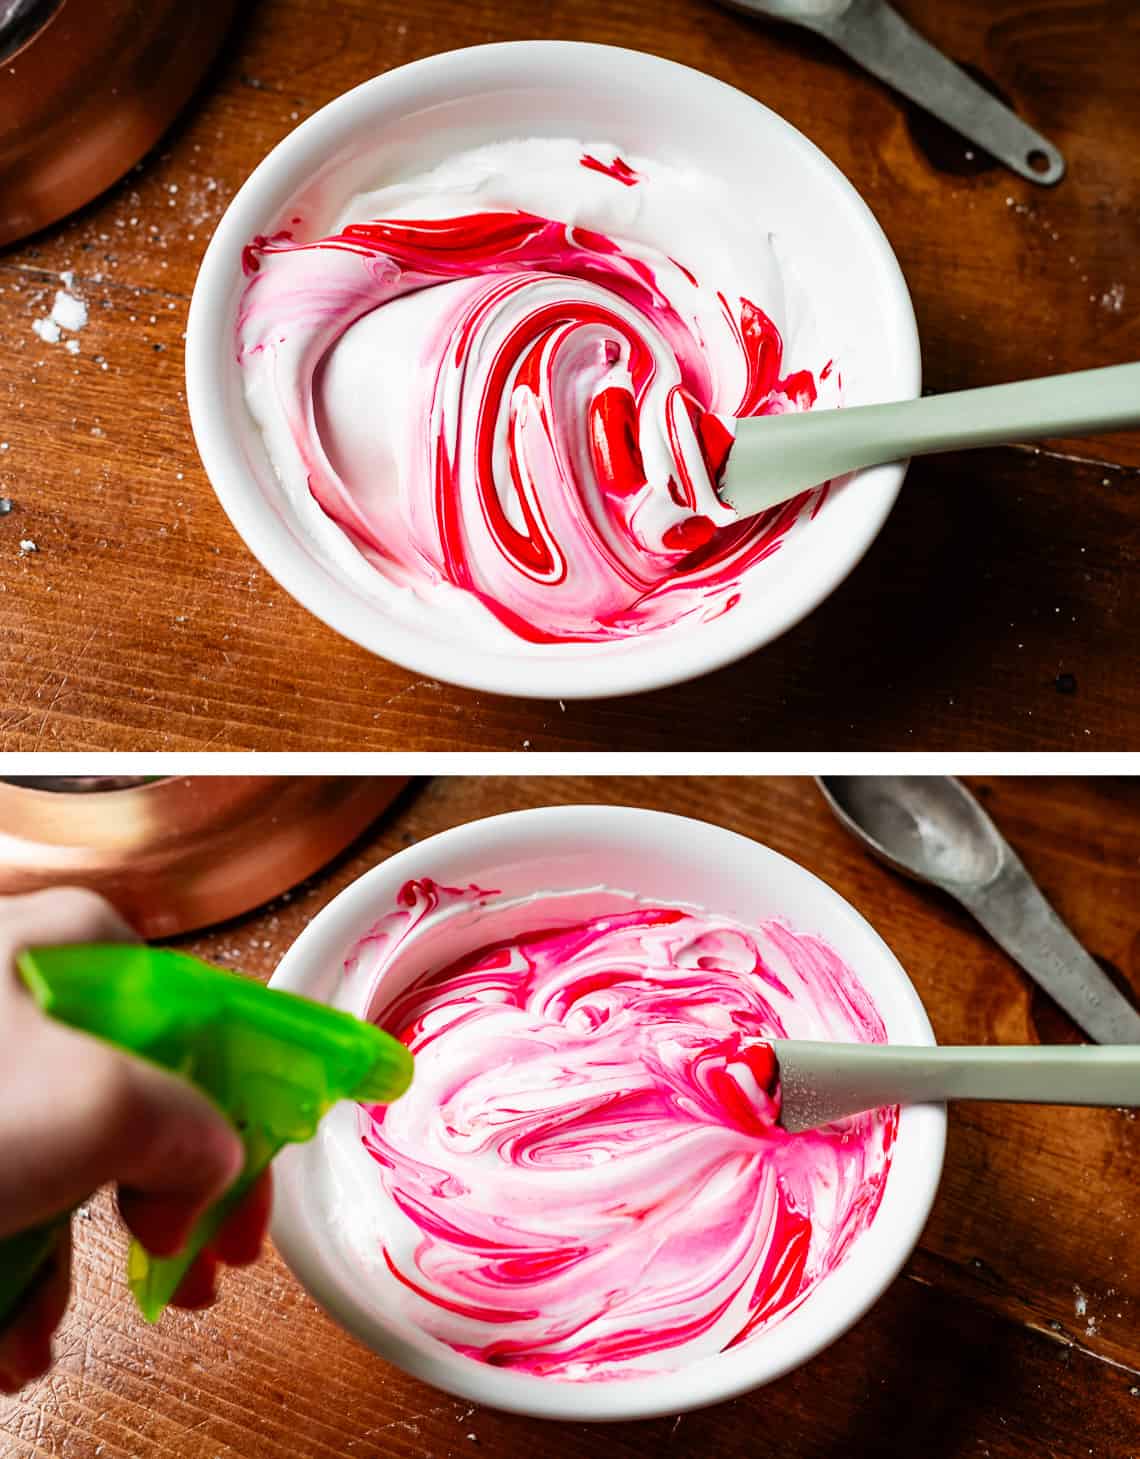 top stirring red coloring into white icing, bottom spraying more water into the red mixture.